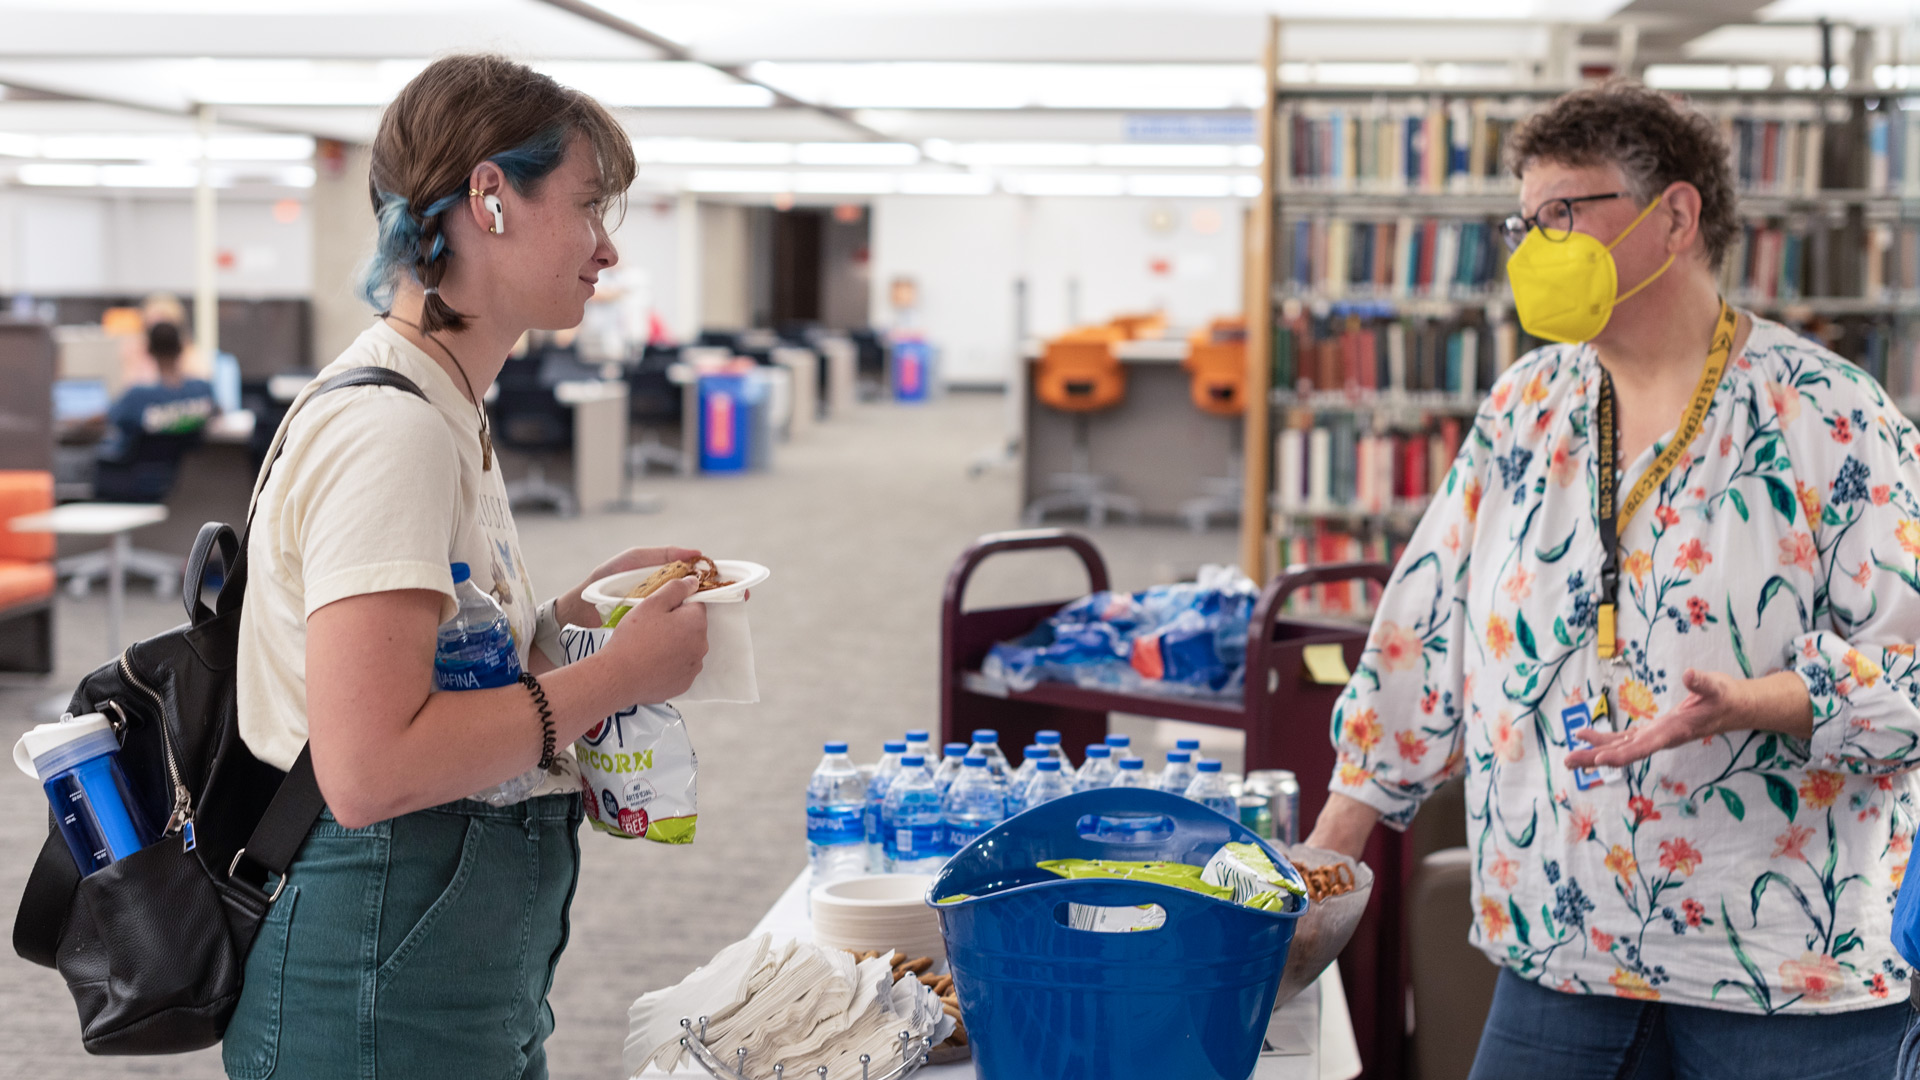 Marianne Reed speaks with a student during last year's Makerspace Open House.